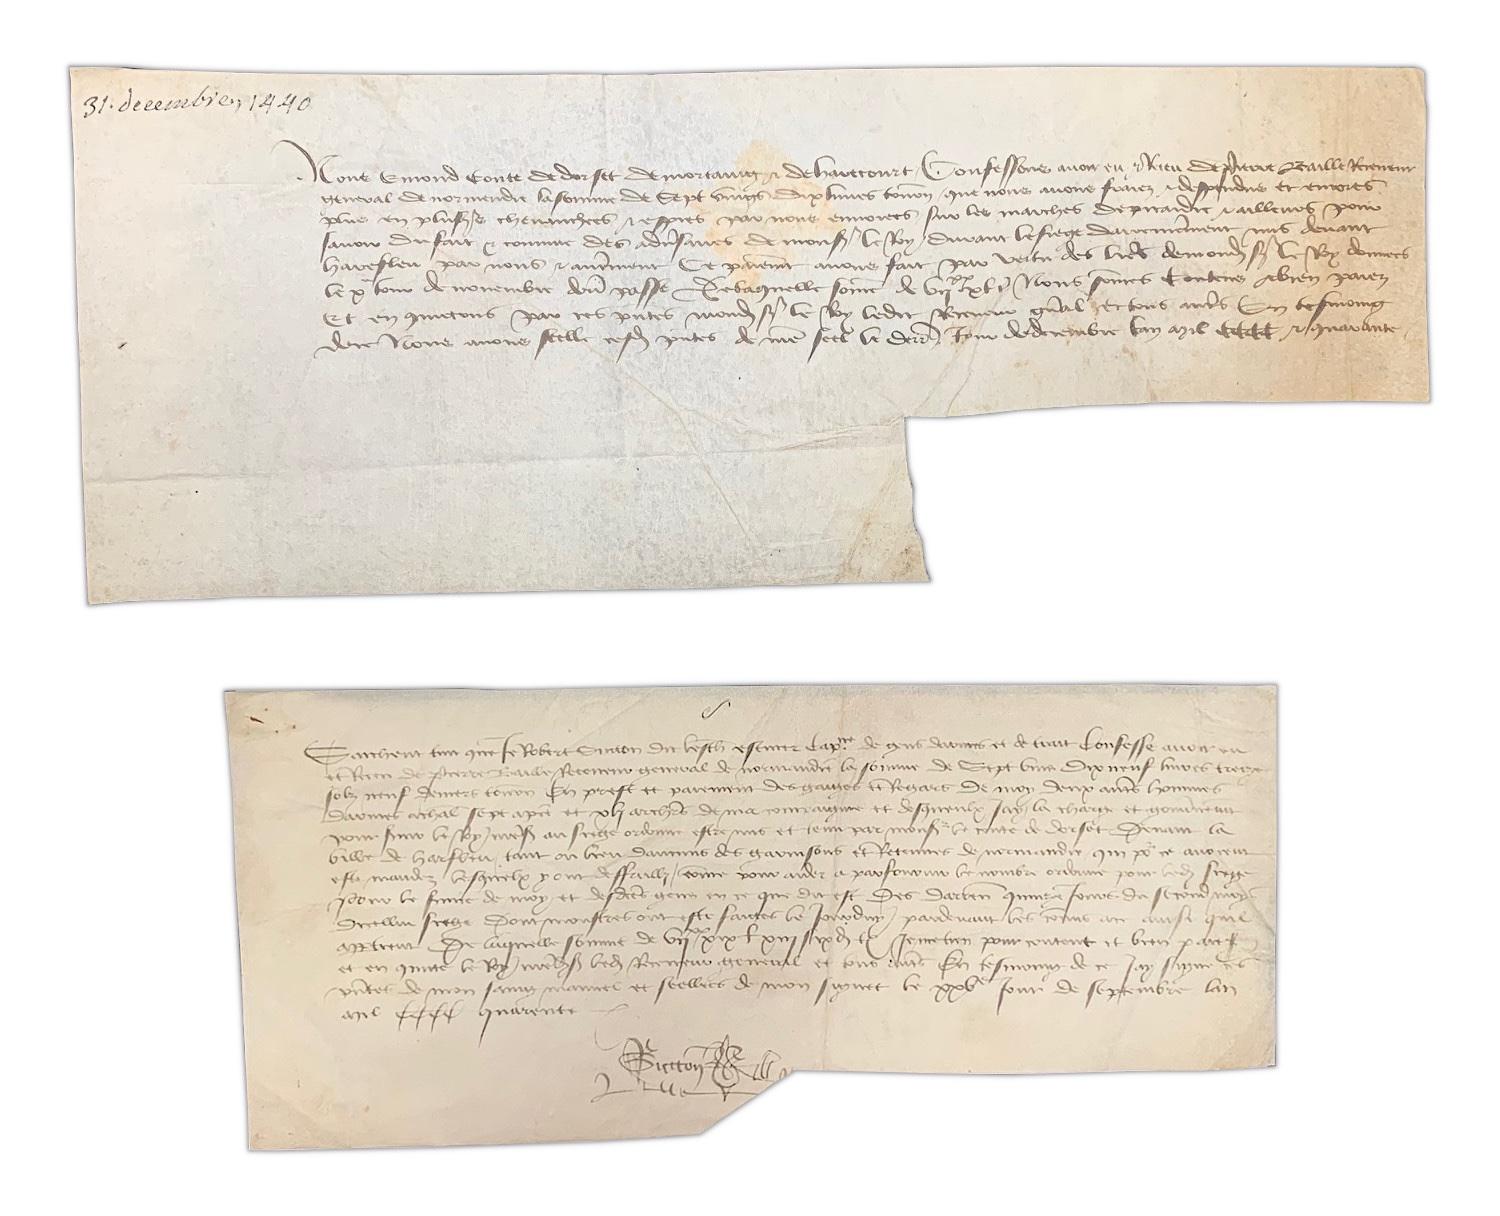 Two rare letters from the 100 Years War, carried by Royal Messenger
The two letters relate to an English military success at Harfleur in 1440, towards the end of the 100 Years War (1337-1453). 

Fascinating early philatelic artefacts from a key